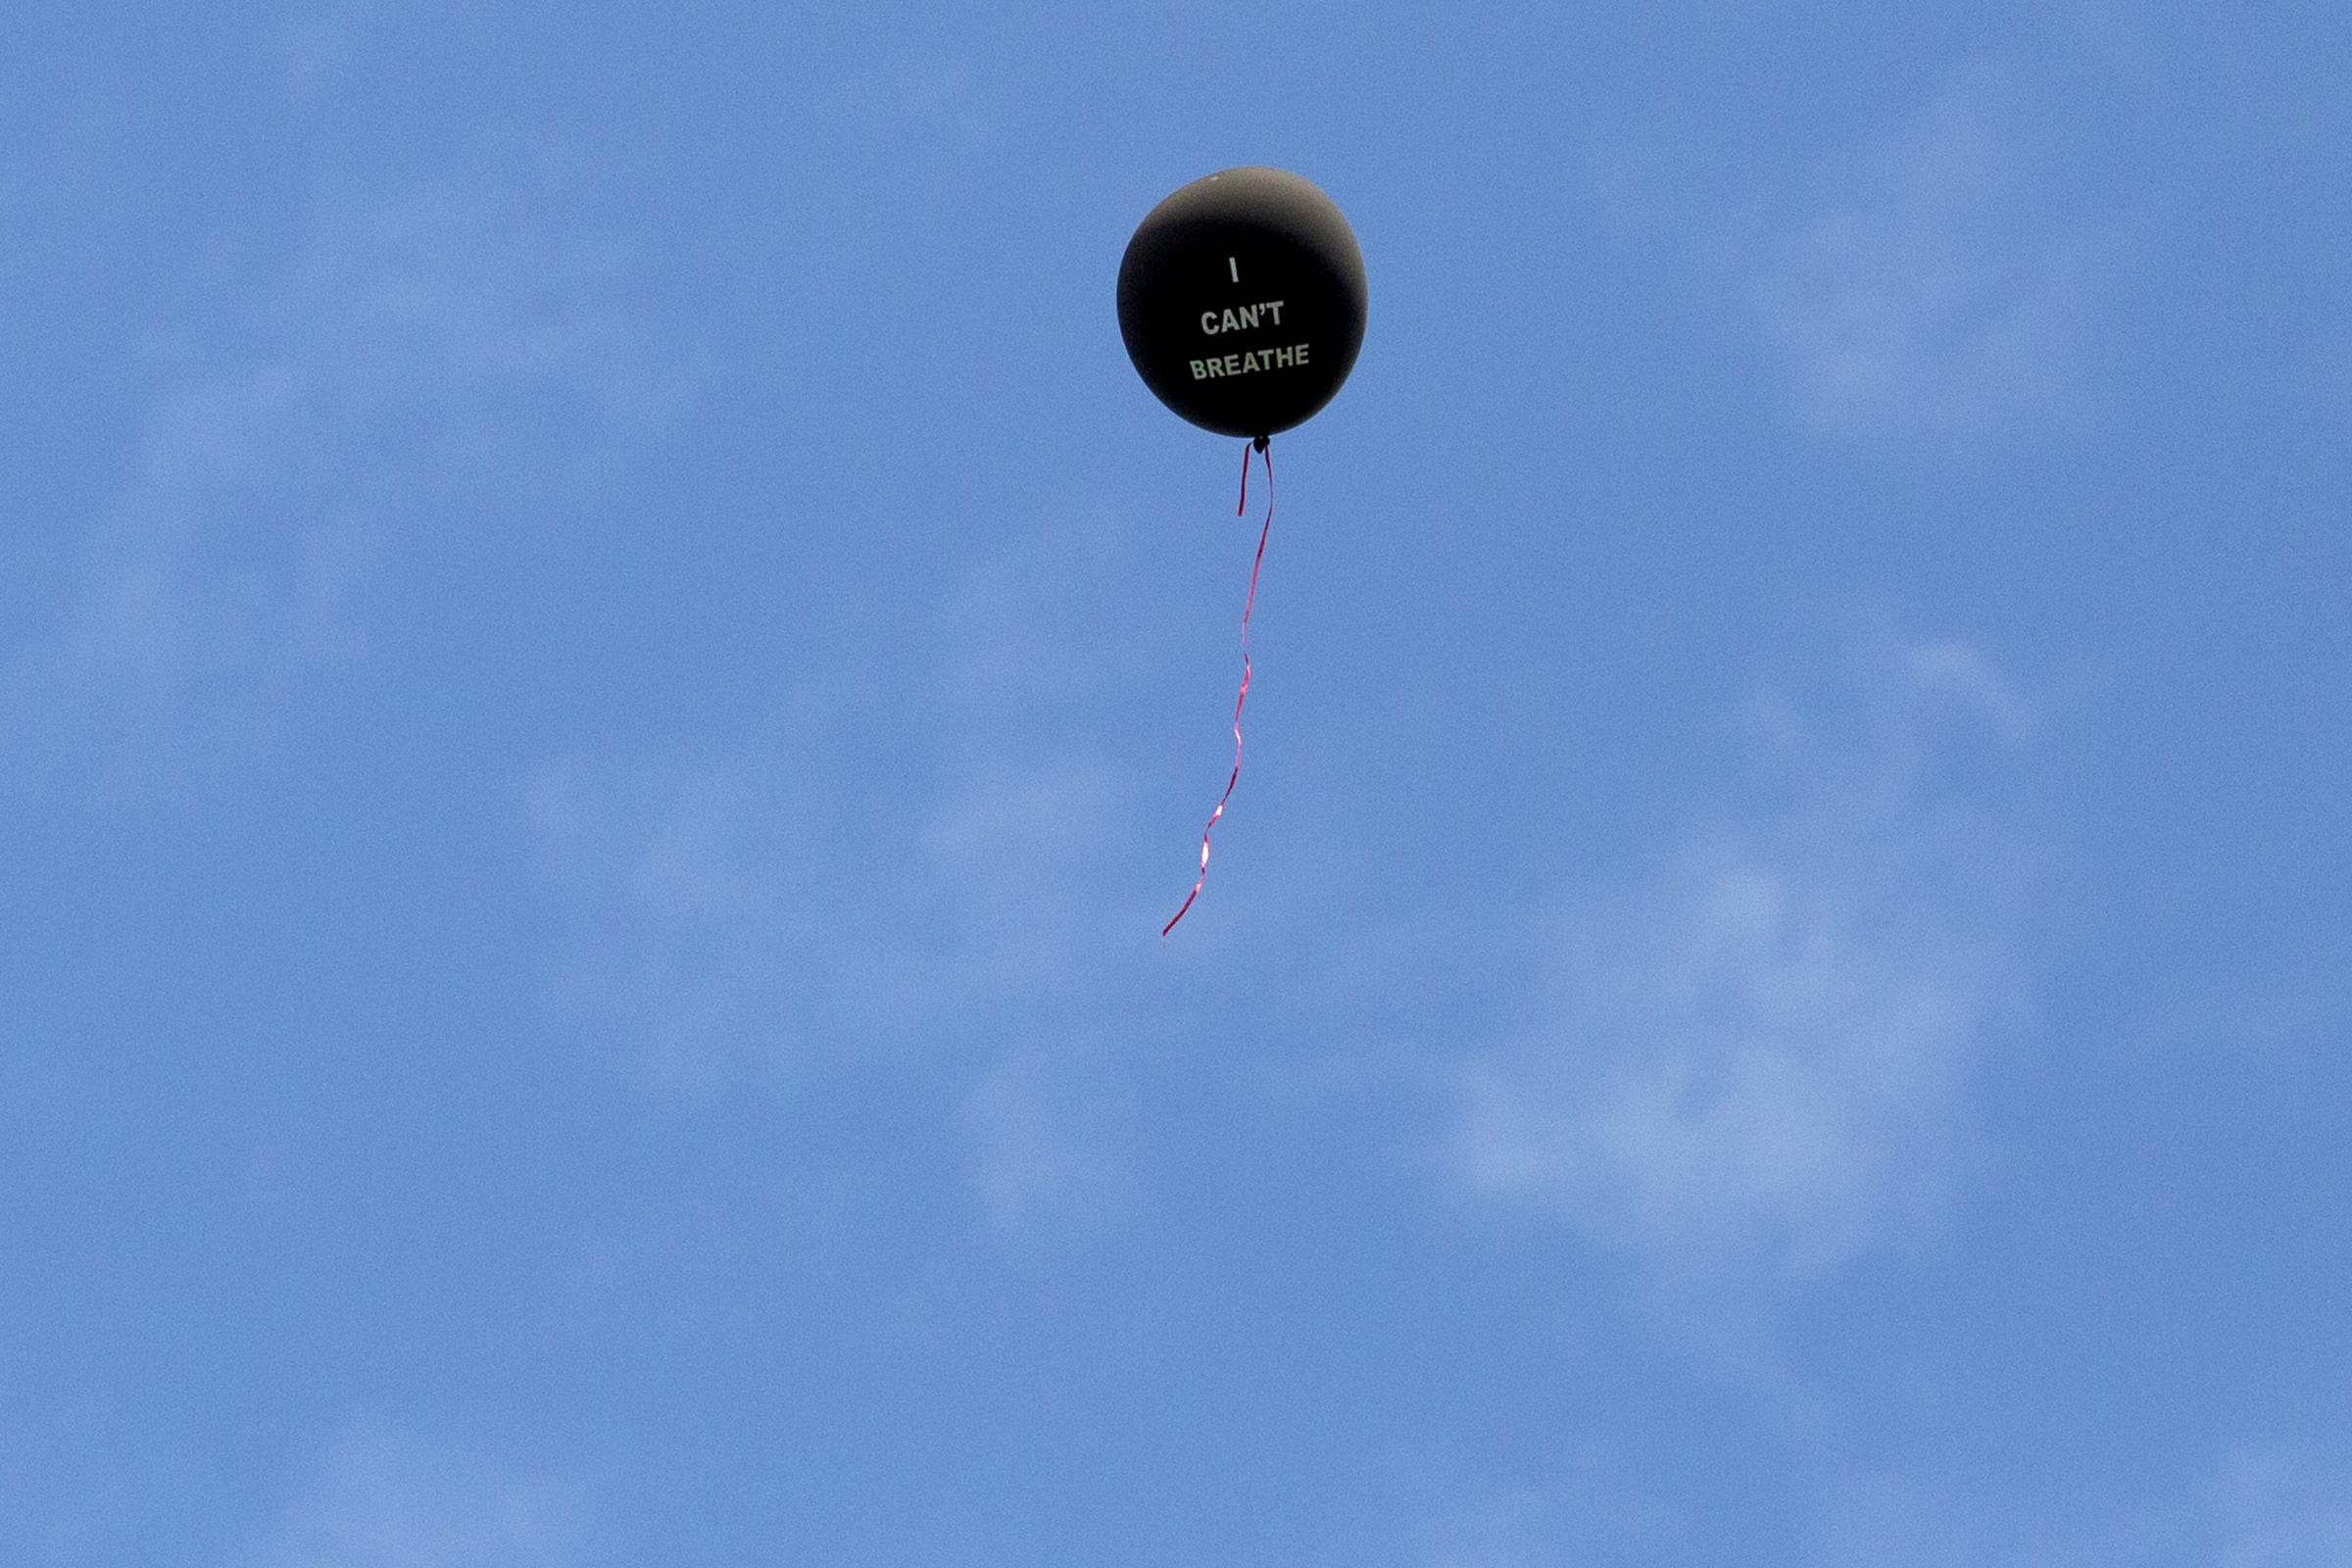 Singles - An “I Can’t Breathe” balloon floats in...